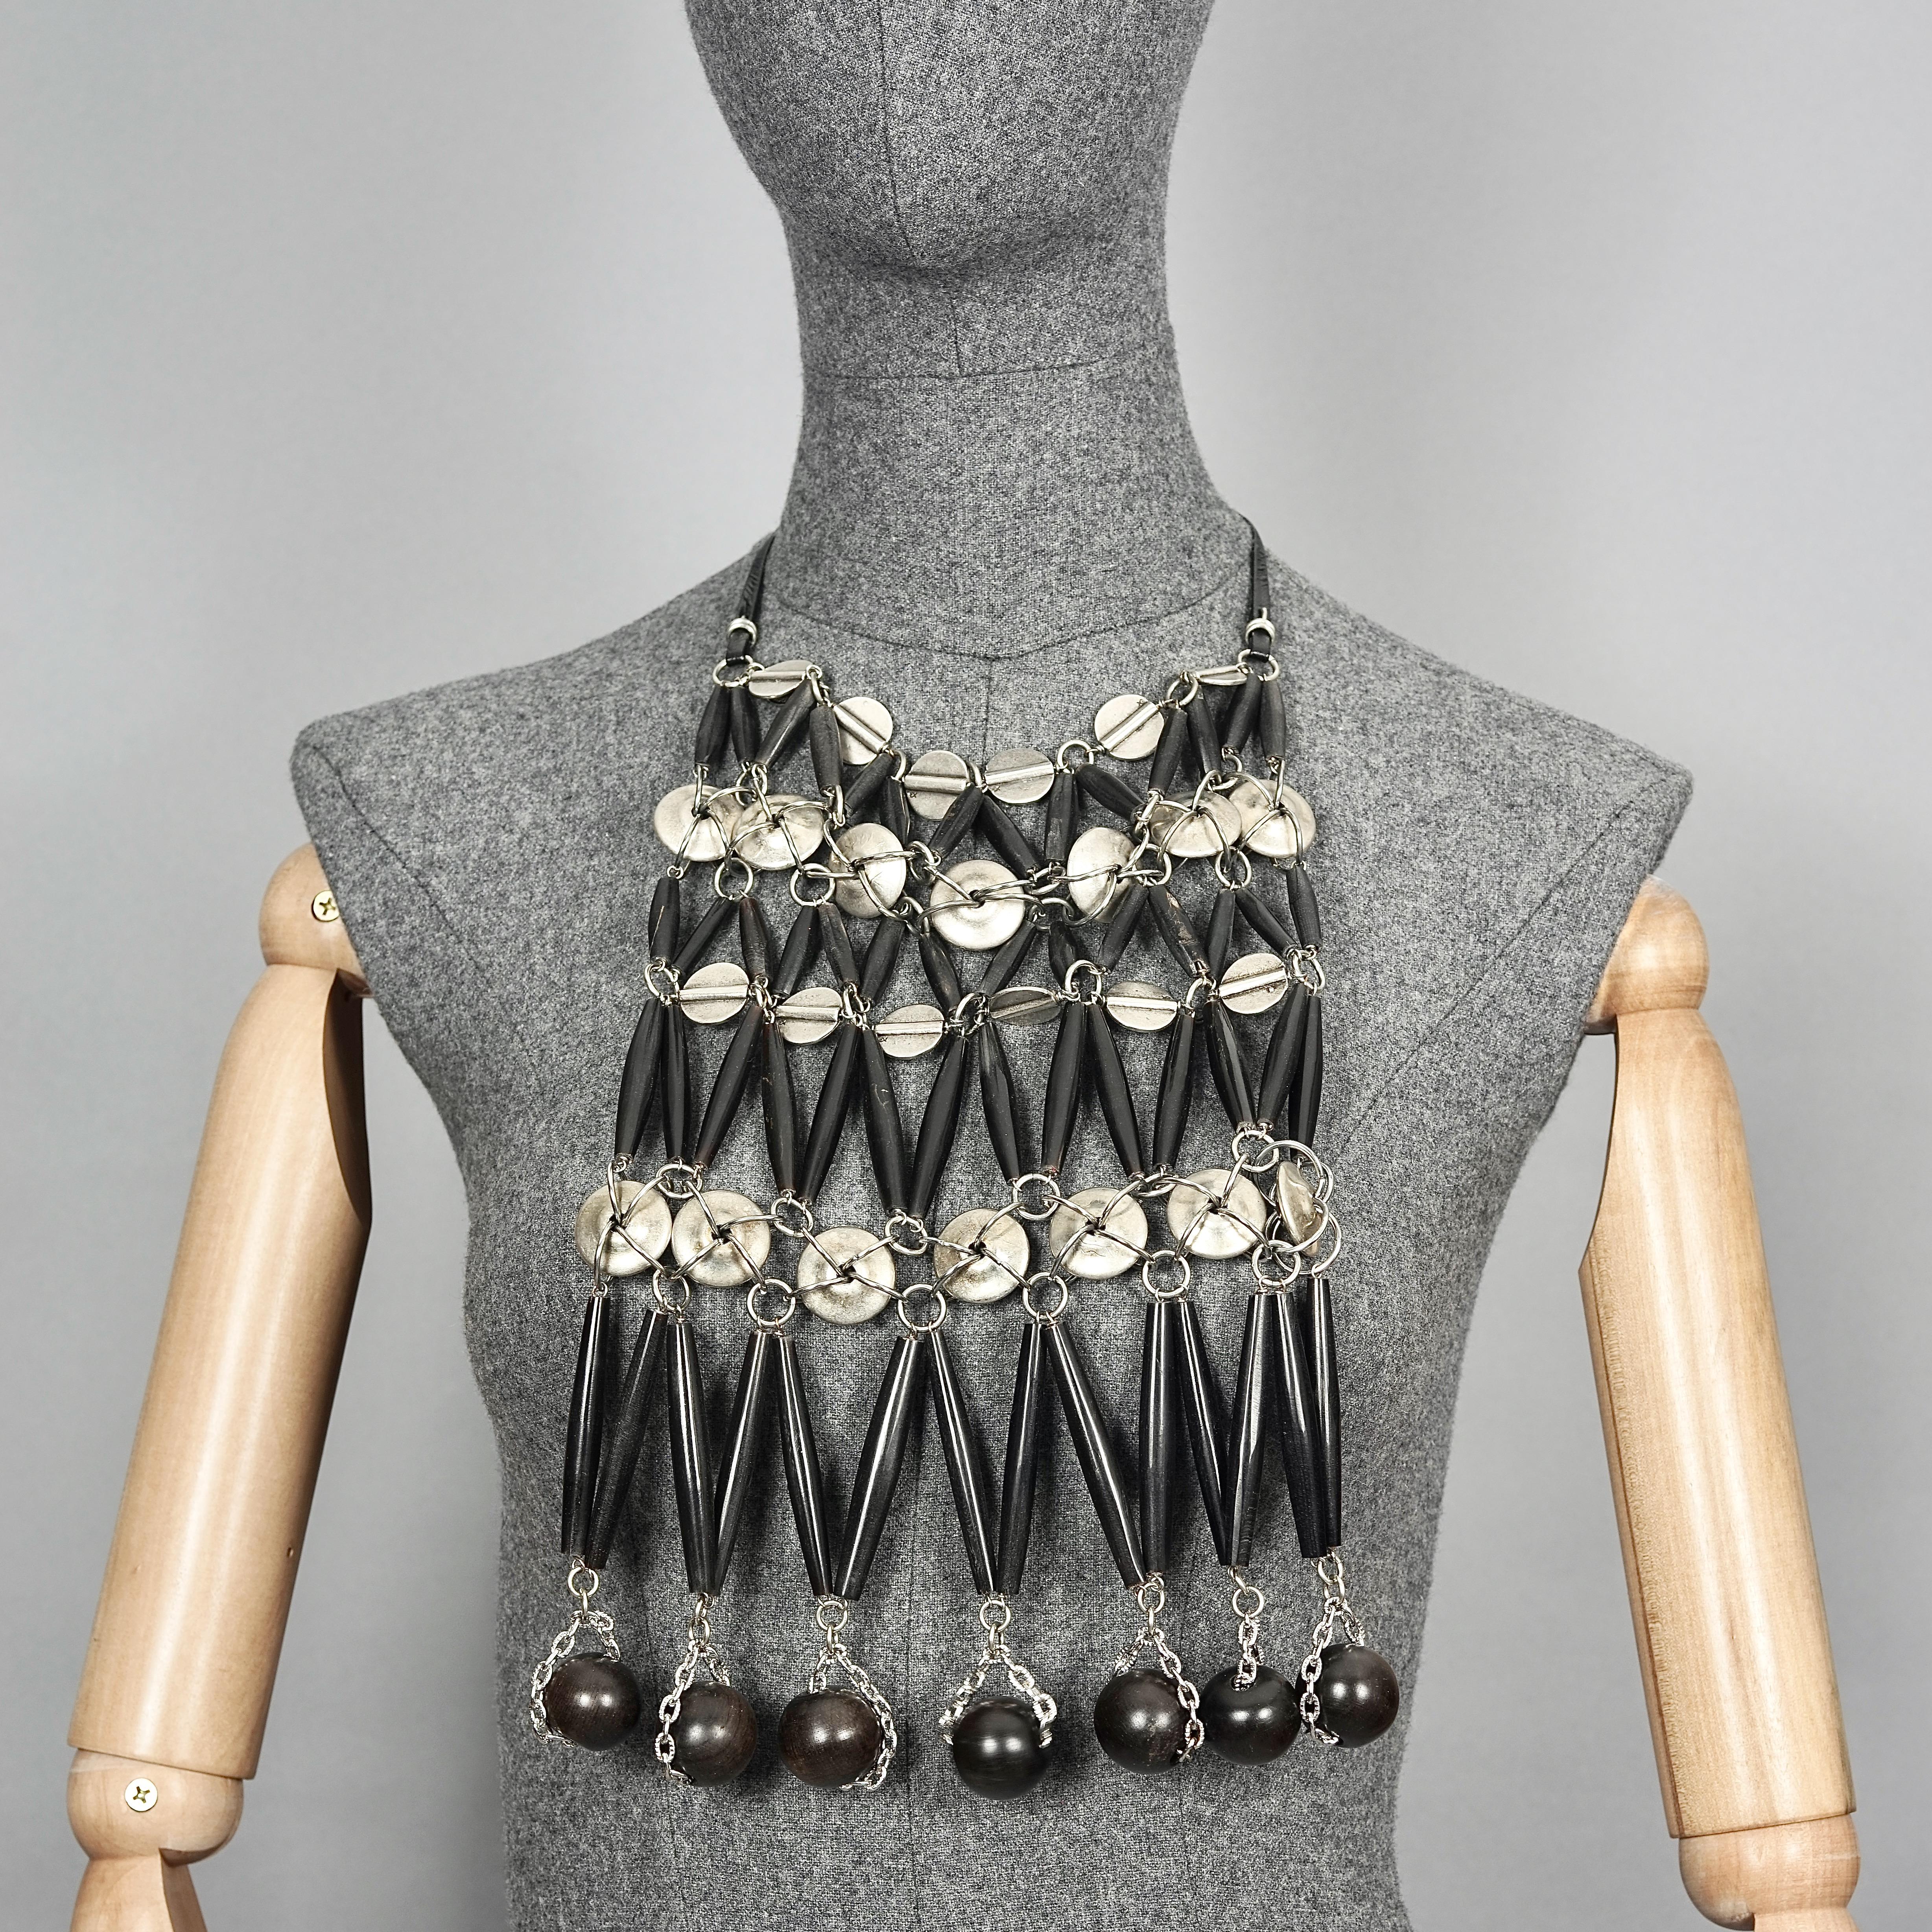 Vintage PACO RABANNE Ebony Wood, Horn Olives and Metal Disc Plastron Bib Necklace

Measurements:
Height: 11.81 inches (30 cm)
Width: 7.87 inches (20 cm)

Features:
- 100% Authentic PACO RABANNE.
- Ebony wood beads, horn olives and metal disc